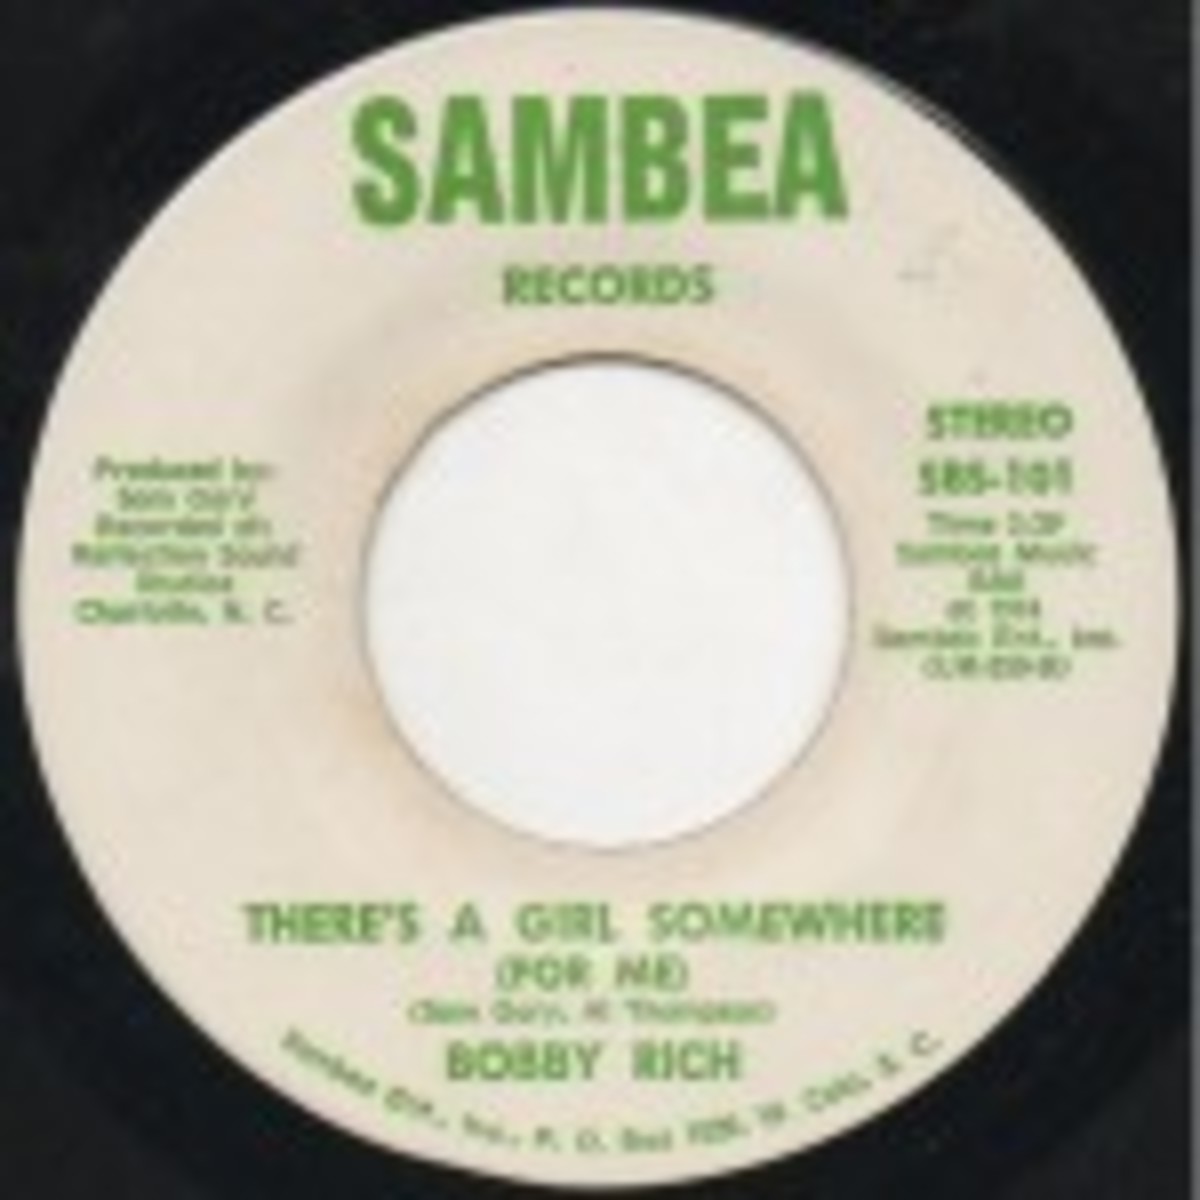 Bobby Rich There's A Girl Somewhere For Me